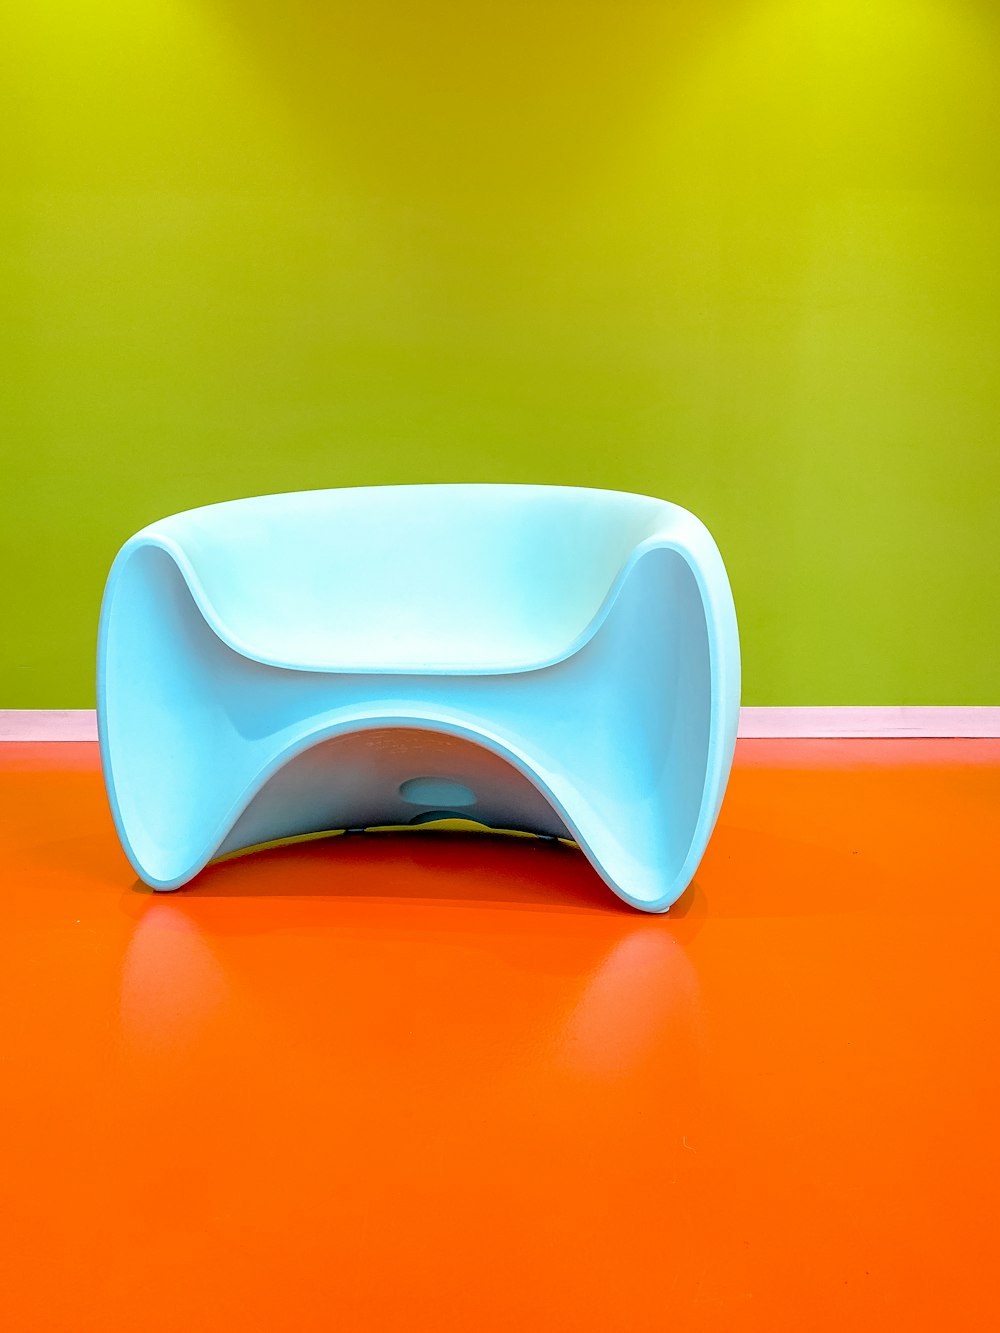 a blue table sitting on top of an orange floor